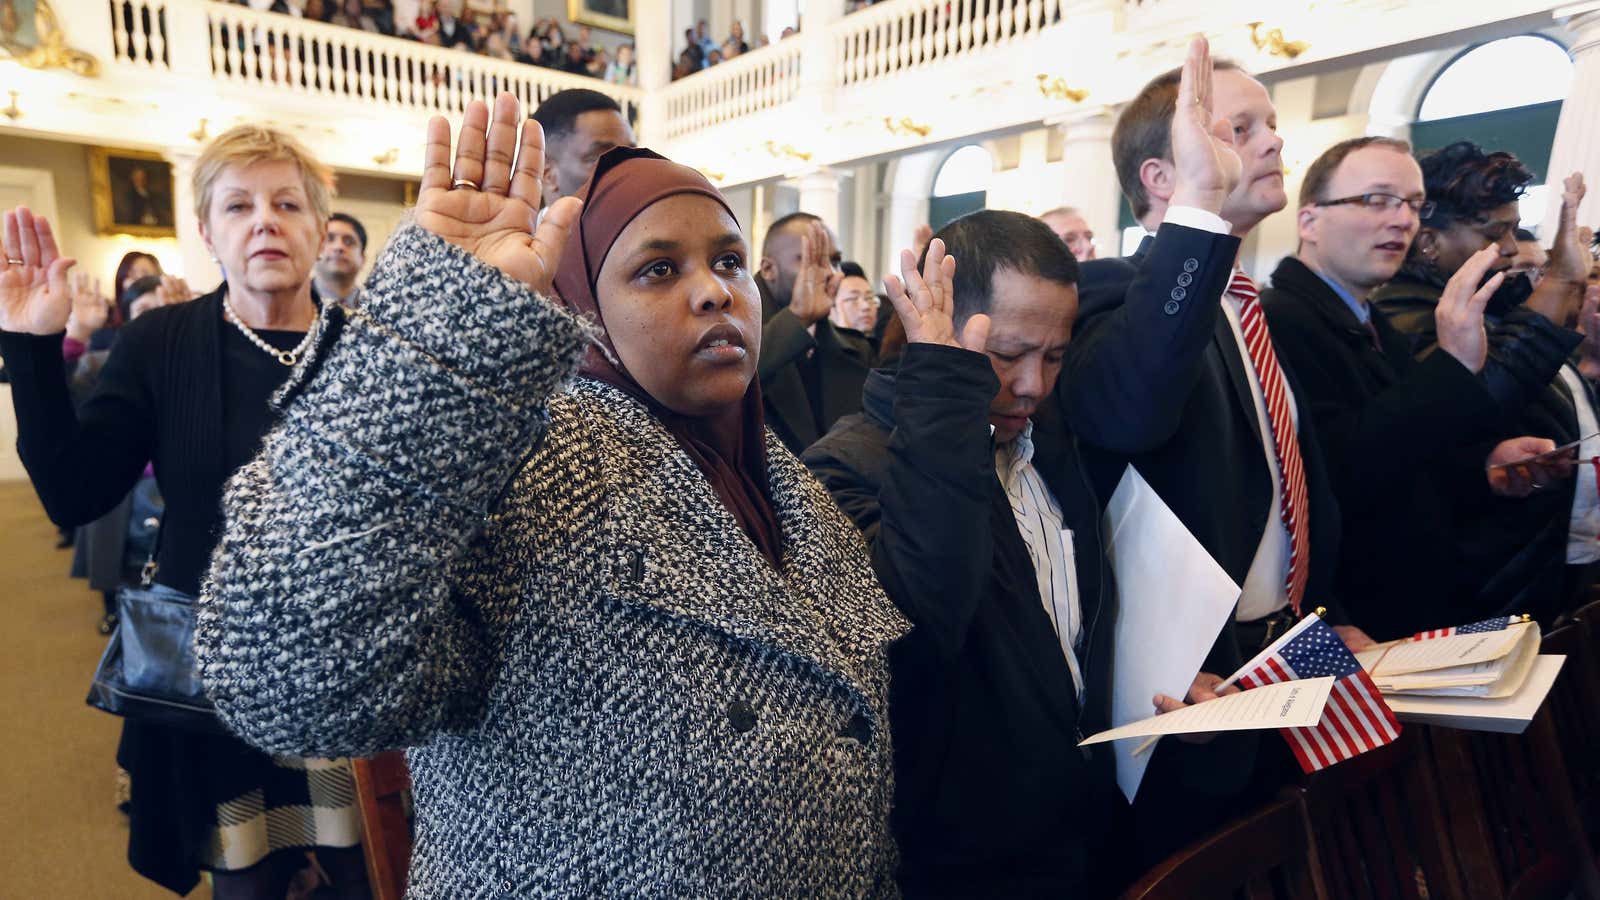 Hawd Ahmed, front left, who came from Somalia, takes the oath of US citizenship during a 2015 naturalization ceremony.